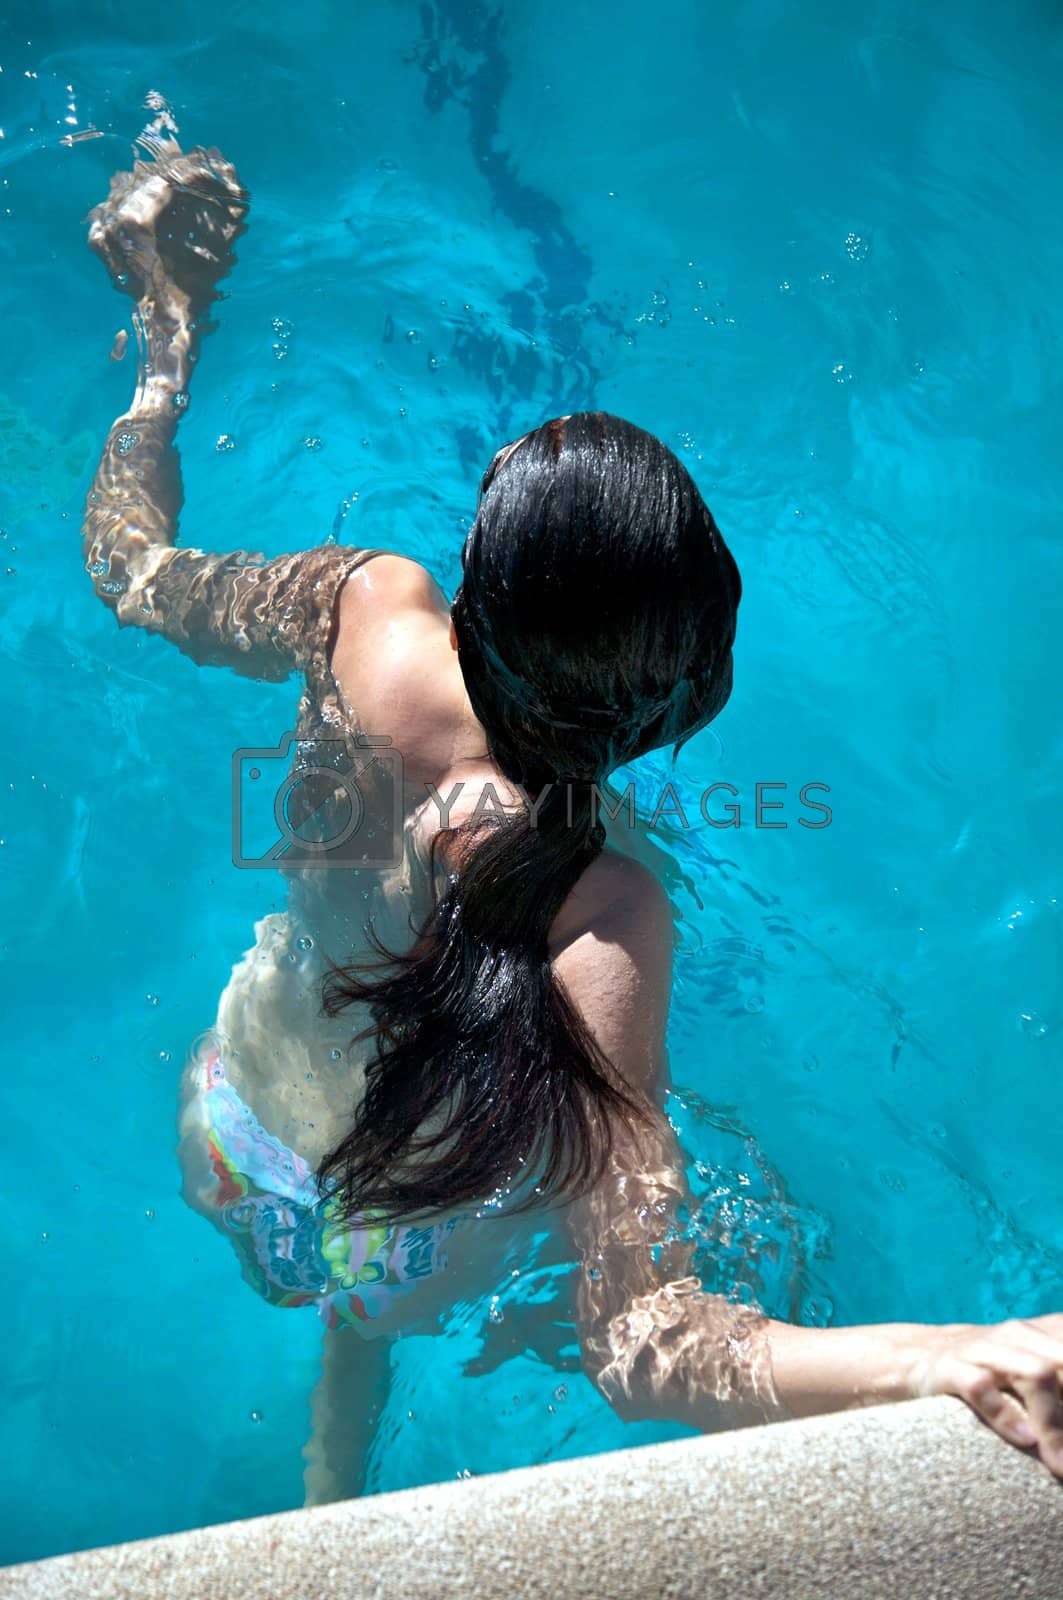 Royalty free image of woman waiting to swim by quintanilla